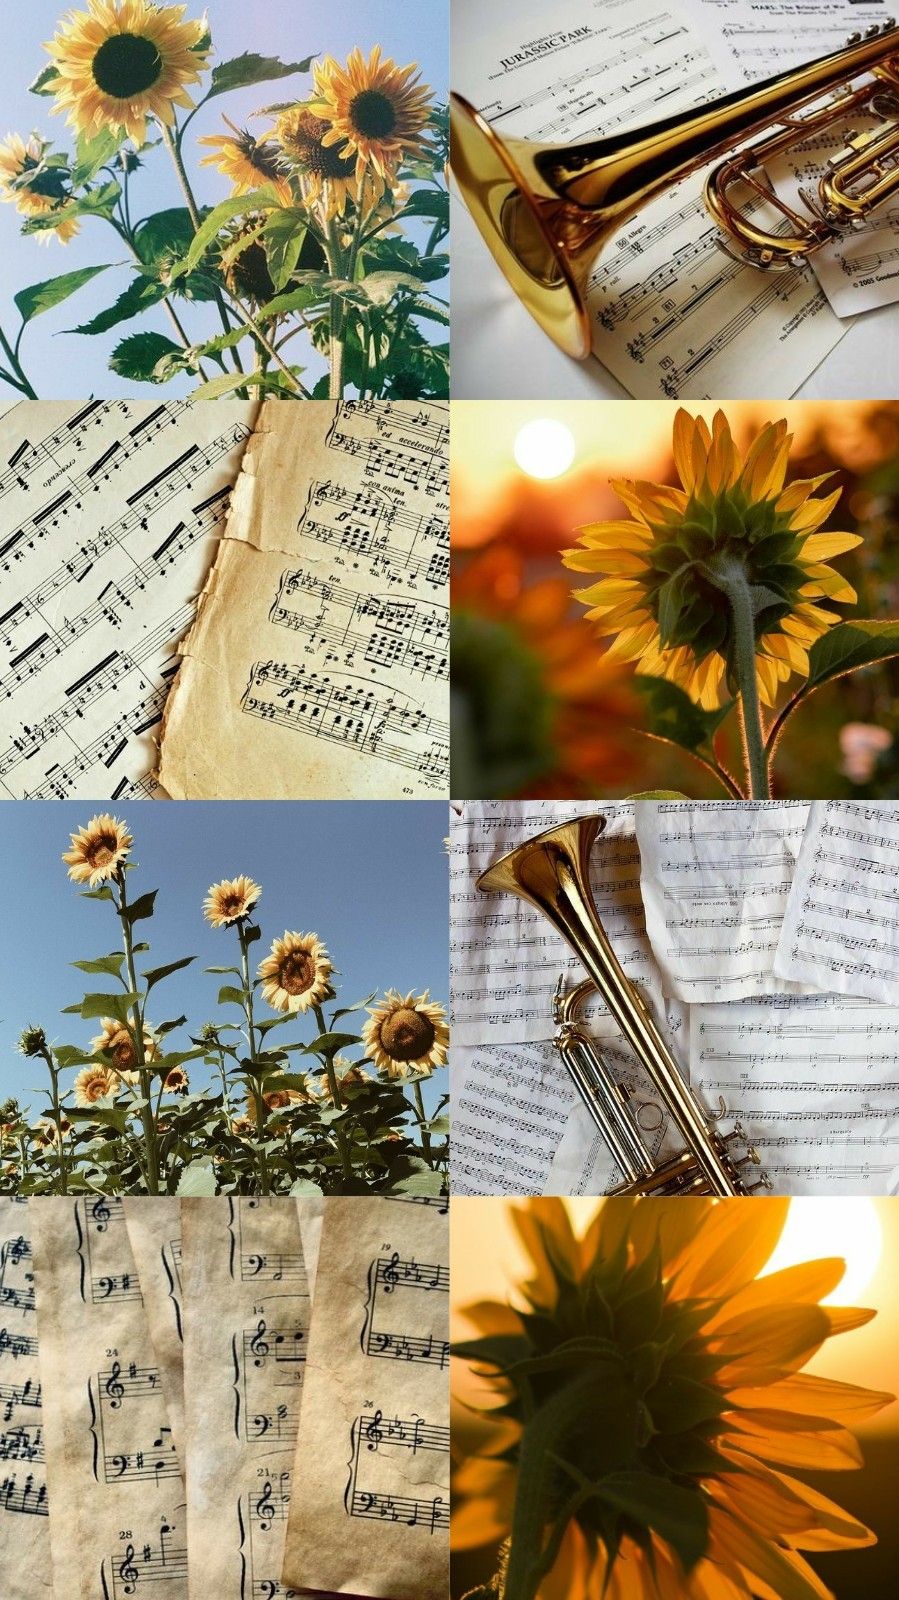 A collage of sunflowers, sheet music, and a trumpet. - Sunflower